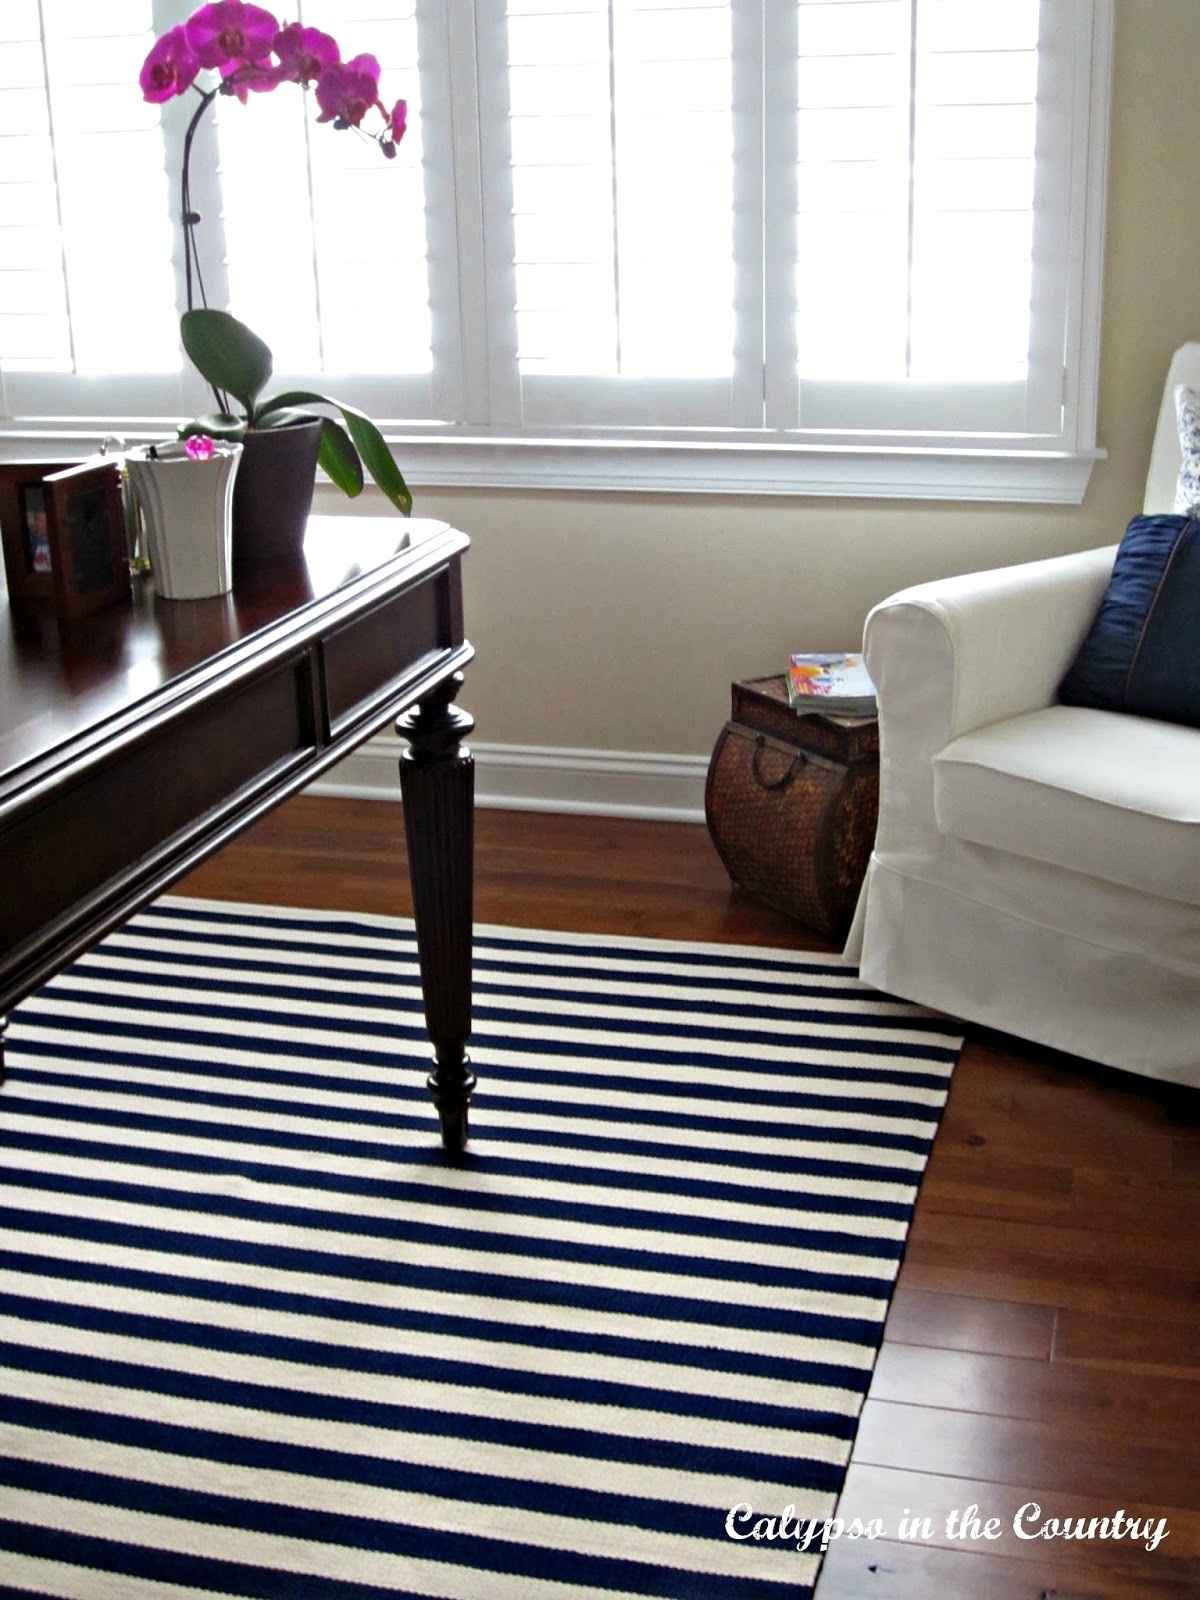 Home Office - Plantation Shutters and Dash and Albert Rug